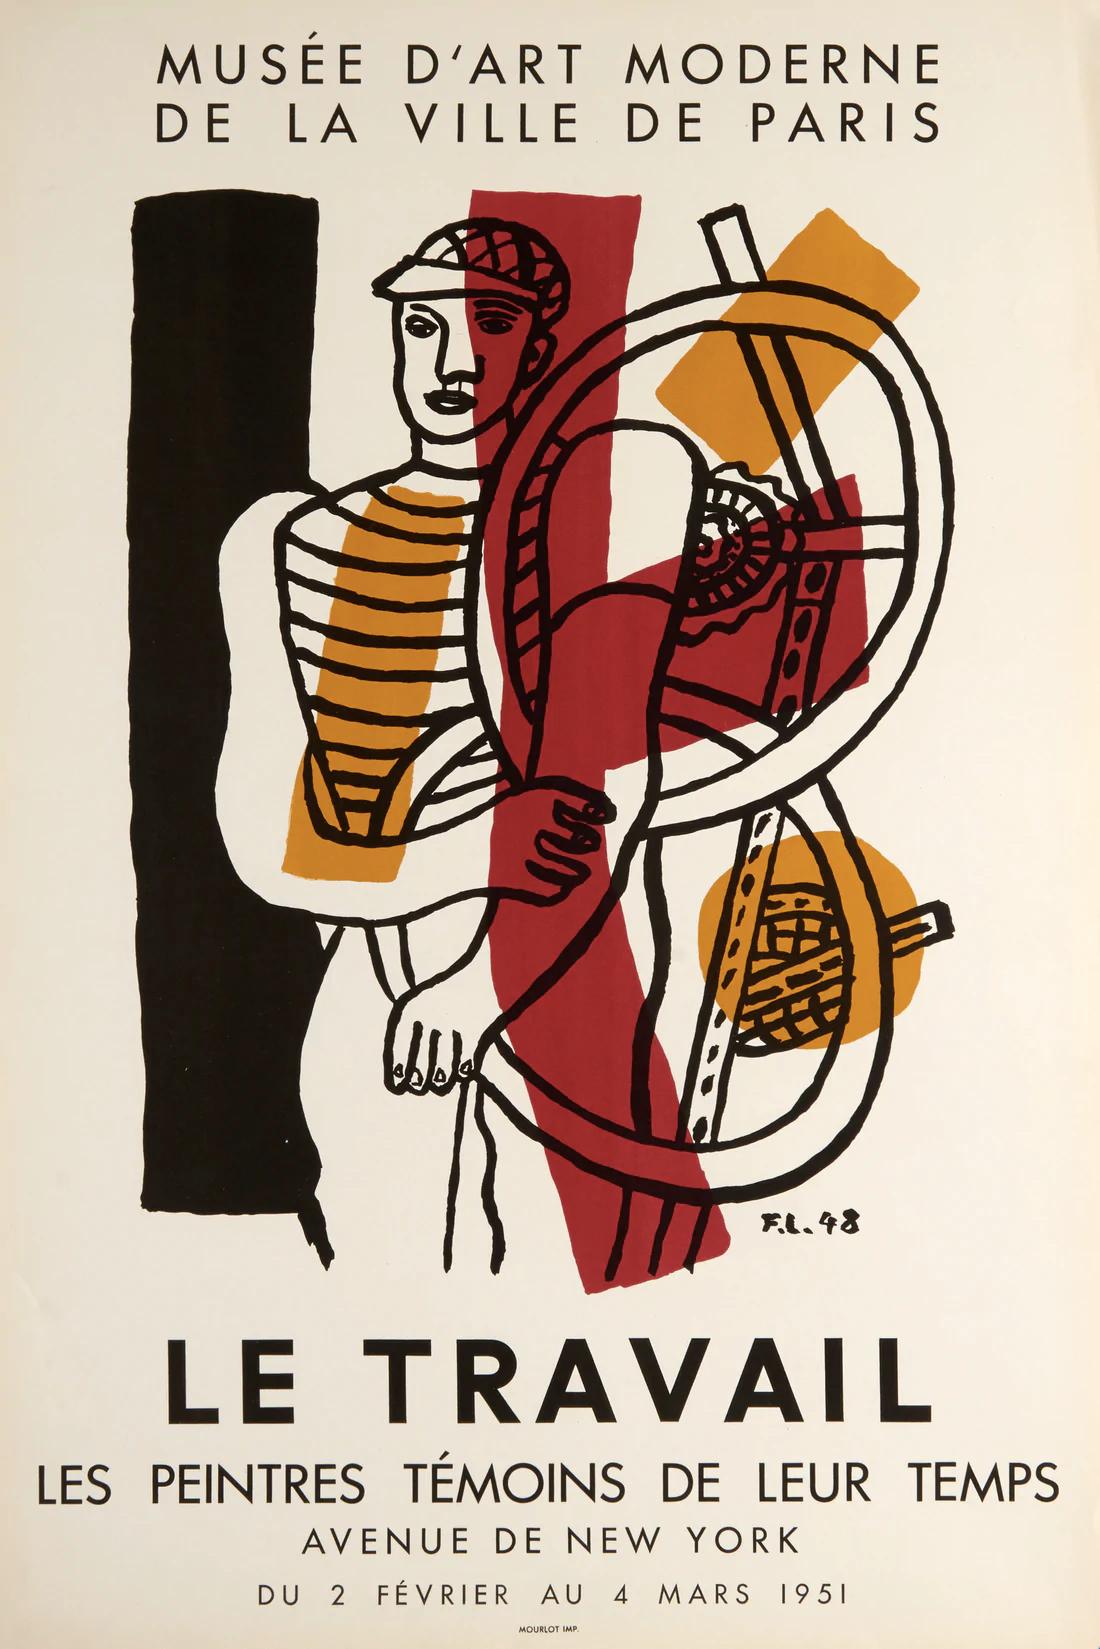 Le Travail by Fernand Leger, 1951 - Print by Fernand Léger